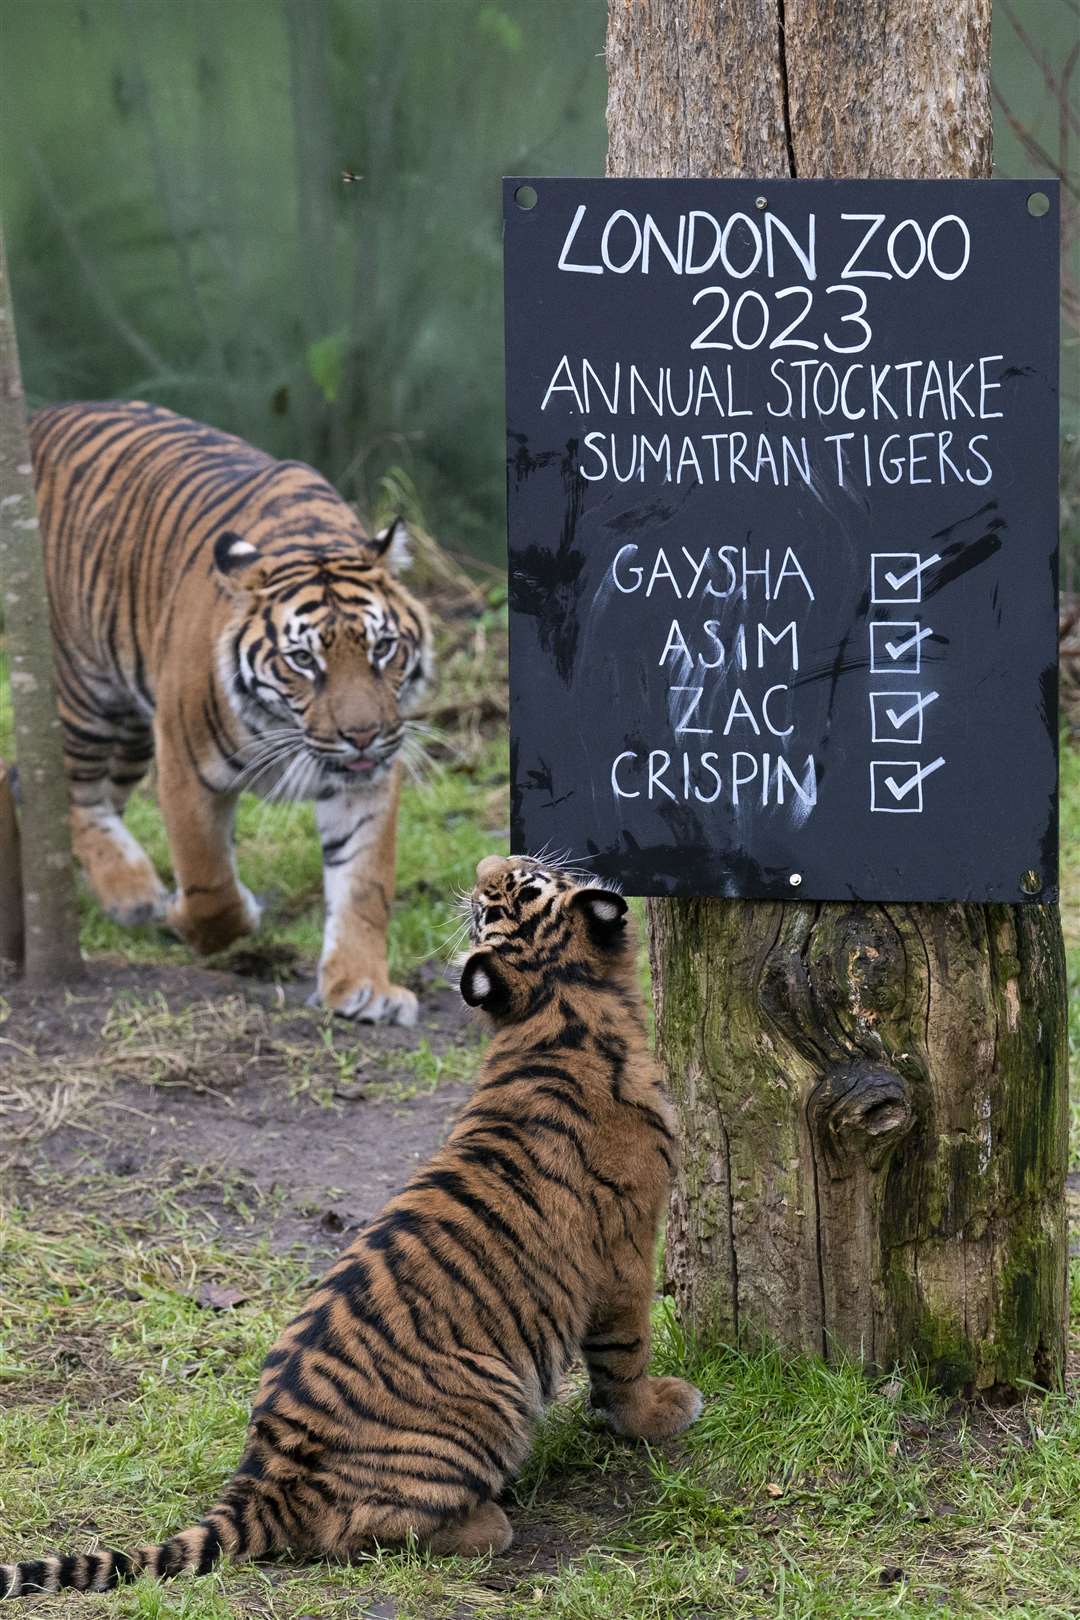 Sumatran tigers take an interest in the figures during the annual stocktake (Kirsty O’Connor/PA)